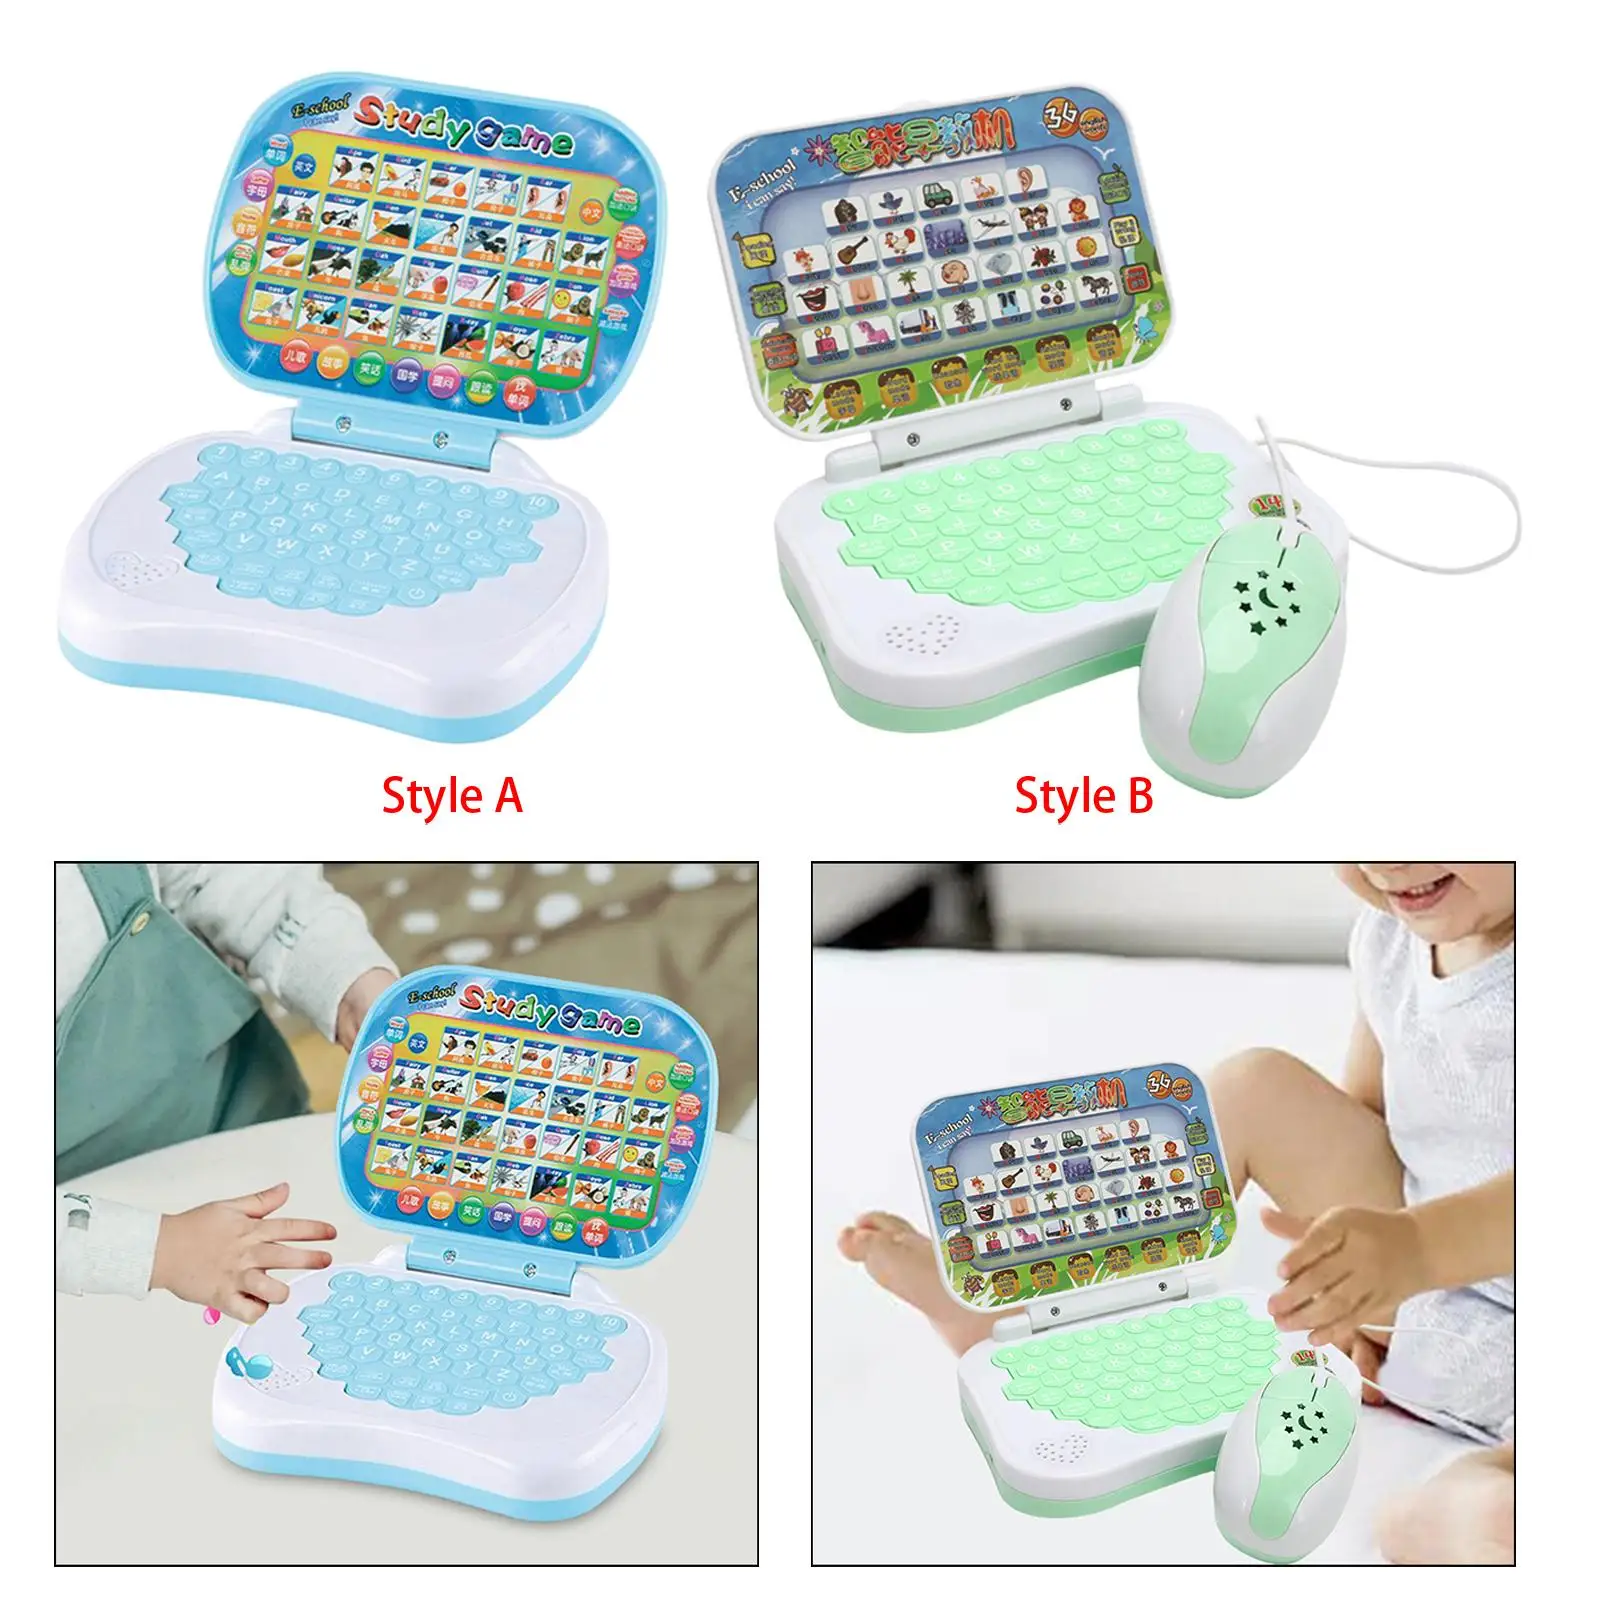 Handheld Language Learning Machine Study Game Computer Child Interactive Learning Pad Tablet for Children Bithday Gifts